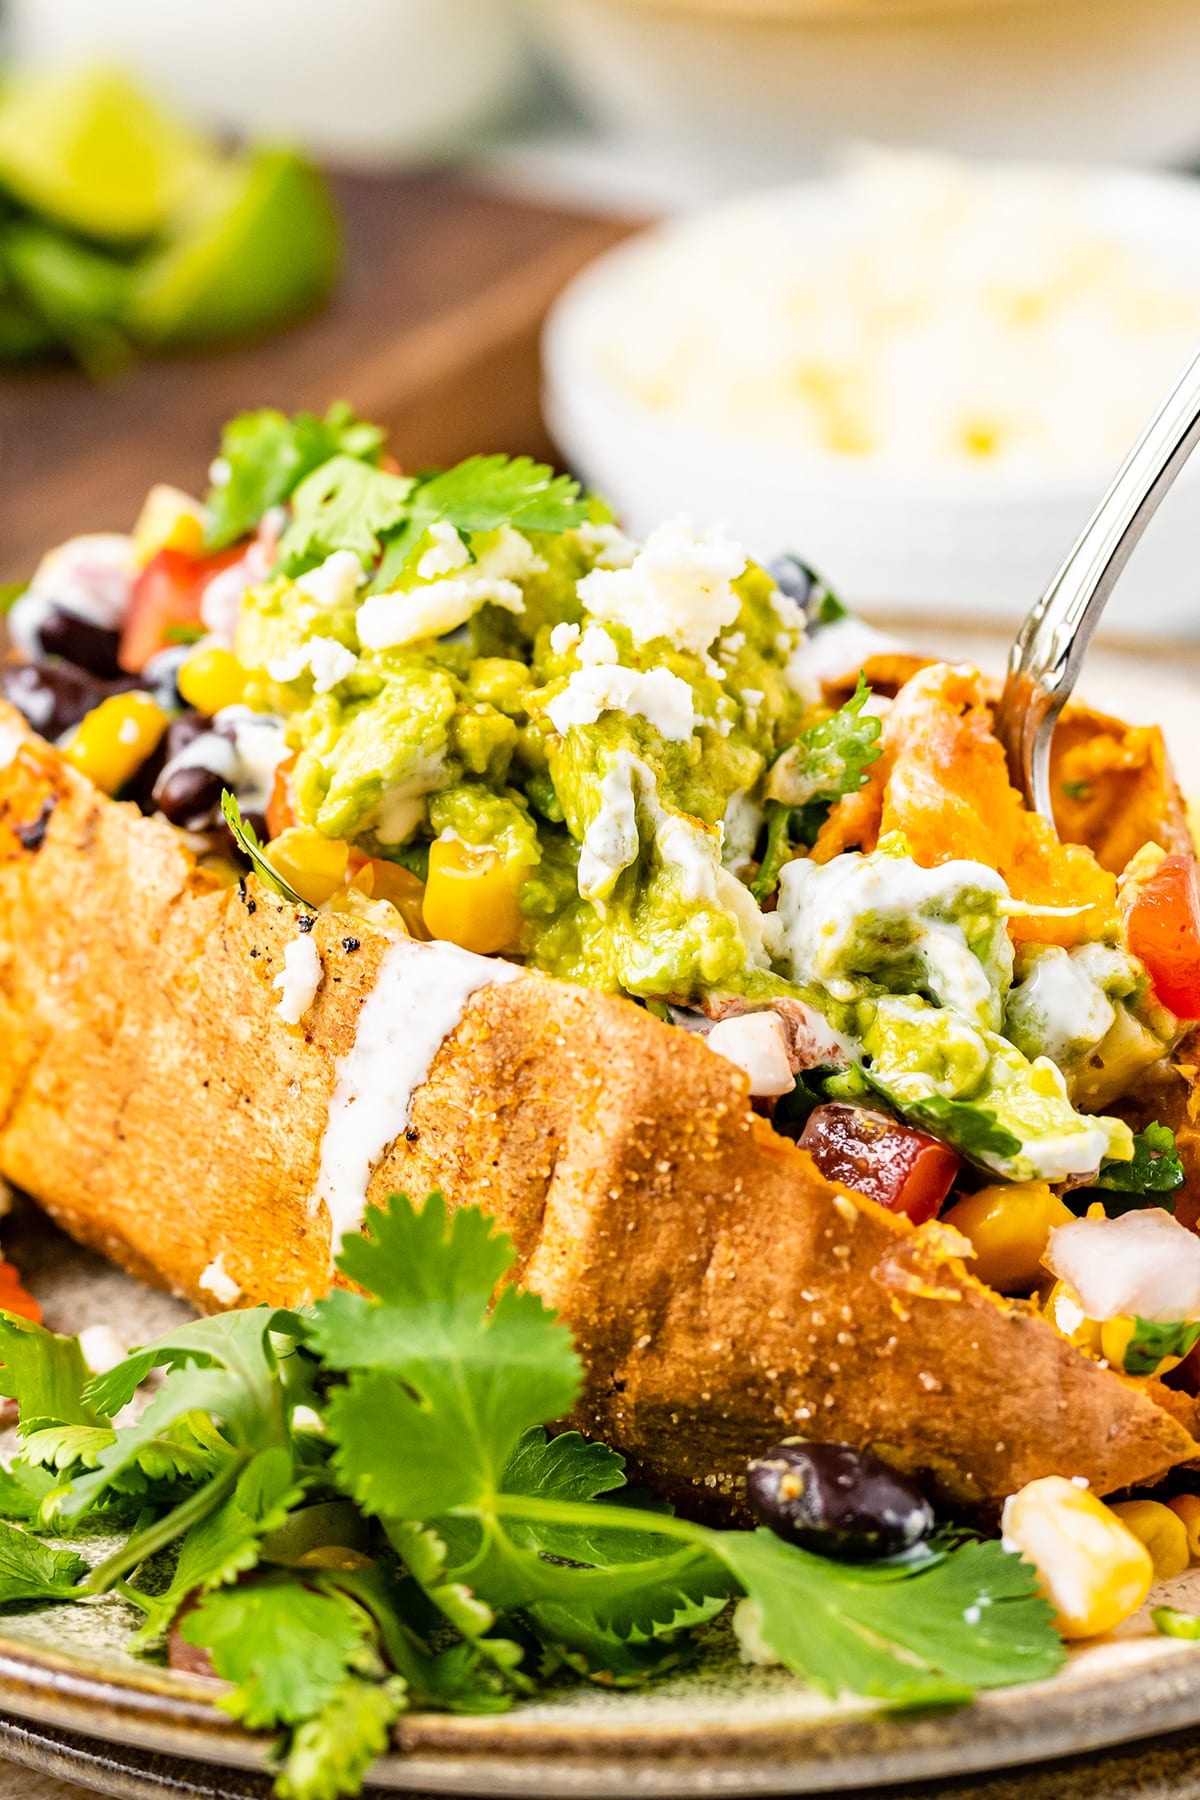 Stuffed baked sweet potatoes with Mexican filling and guacamole